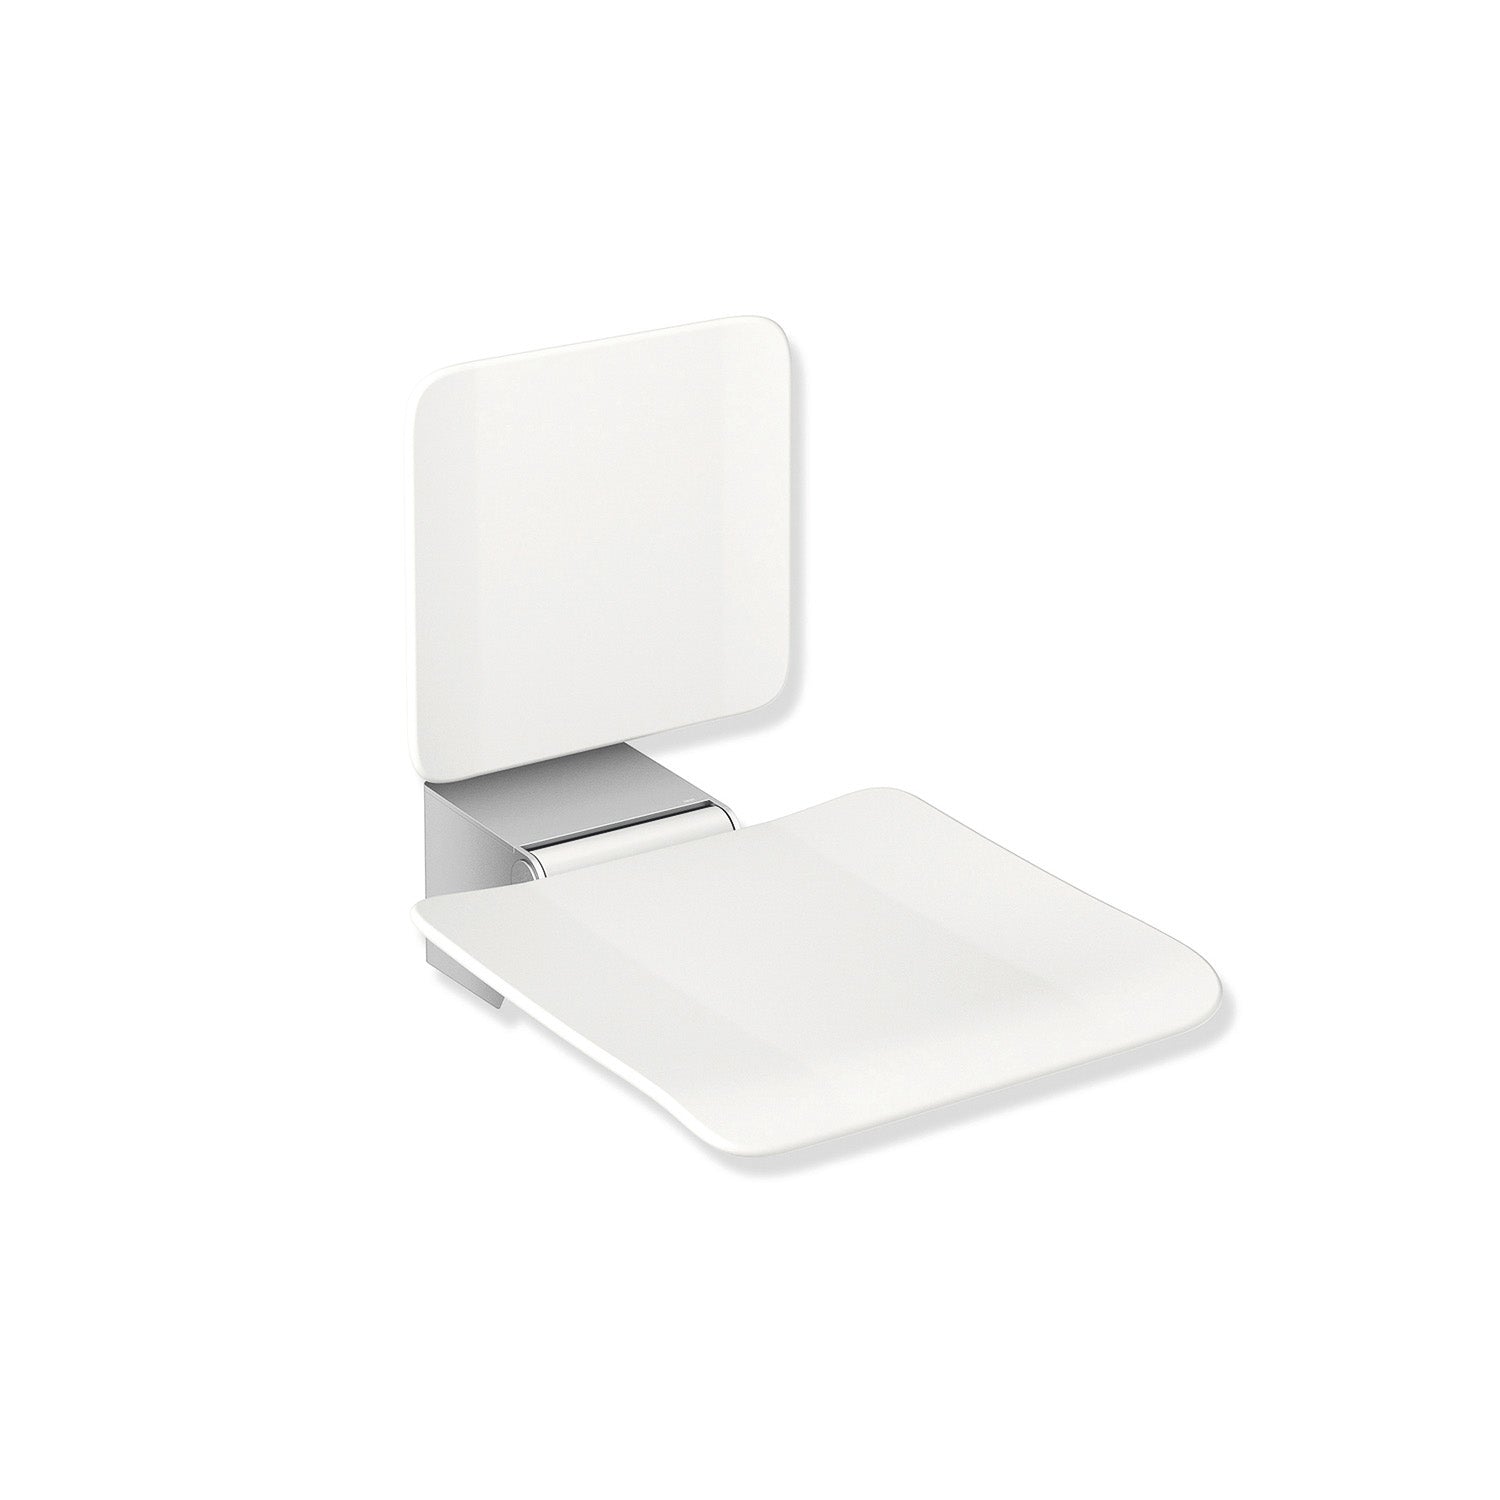 Freestyle Fixed Shower Seat with a Backrest in a white seat and satin steel finish bracket on a white background